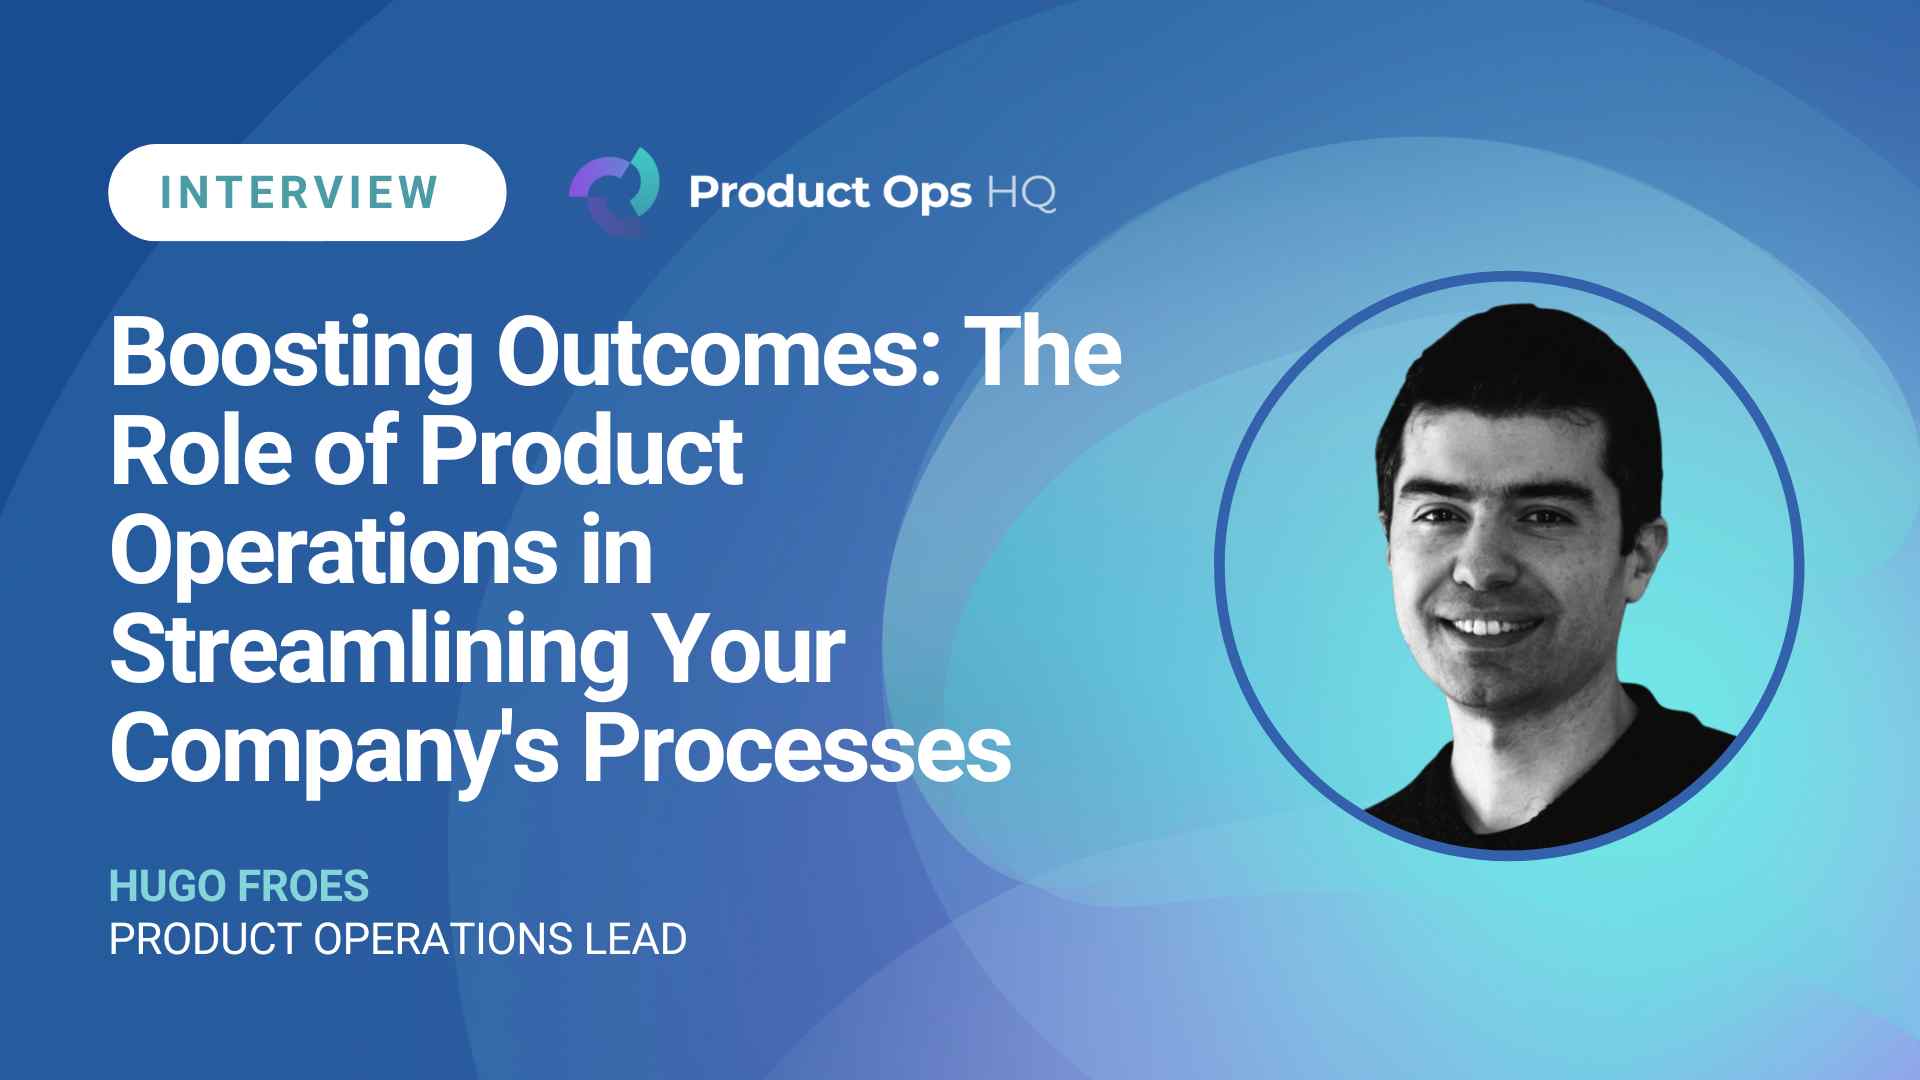 Boosting Outcomes: The Role of Product Operations in Streamlining Your Company’s Processes